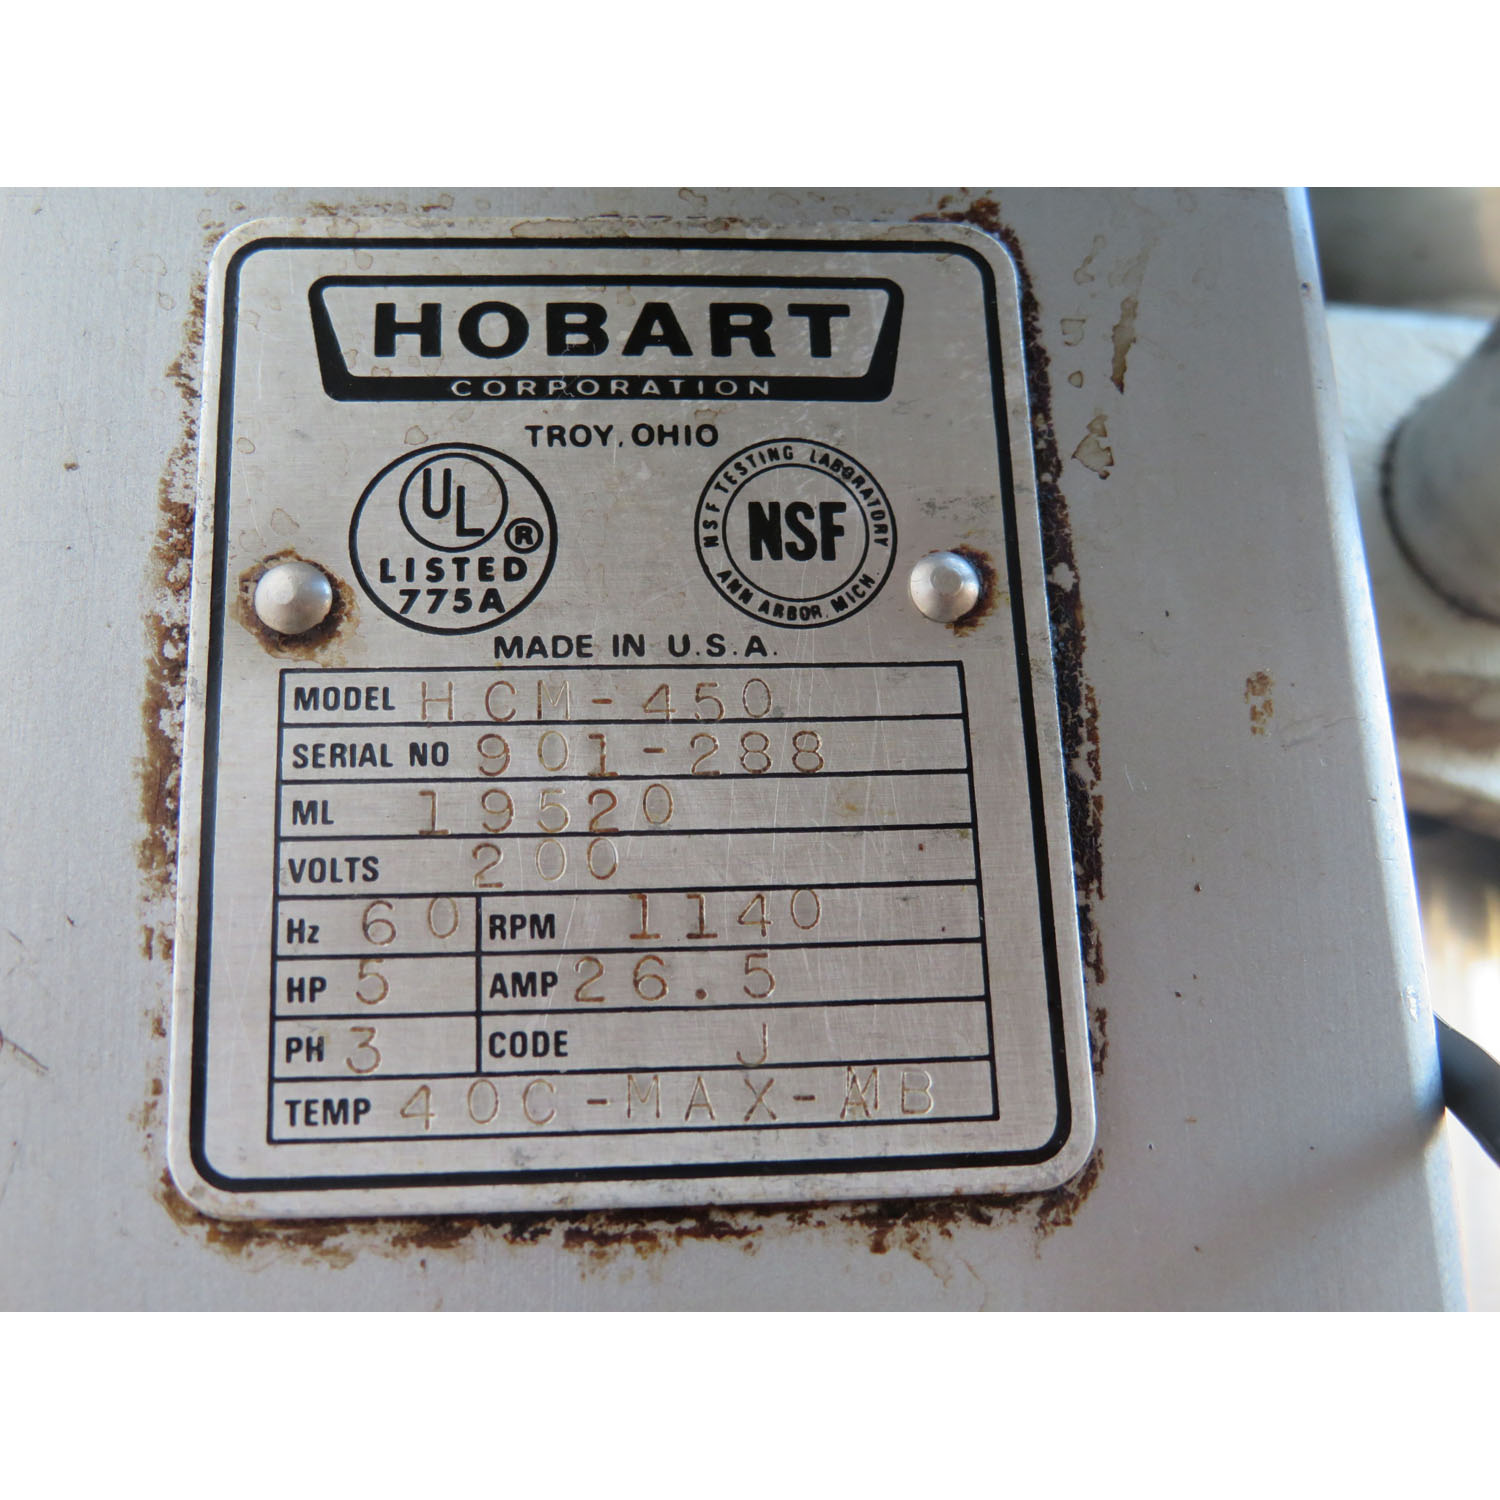 Hobart HCM-450 45 Quart Vertical Cutter Mixer, Used Excellent Condition image 4